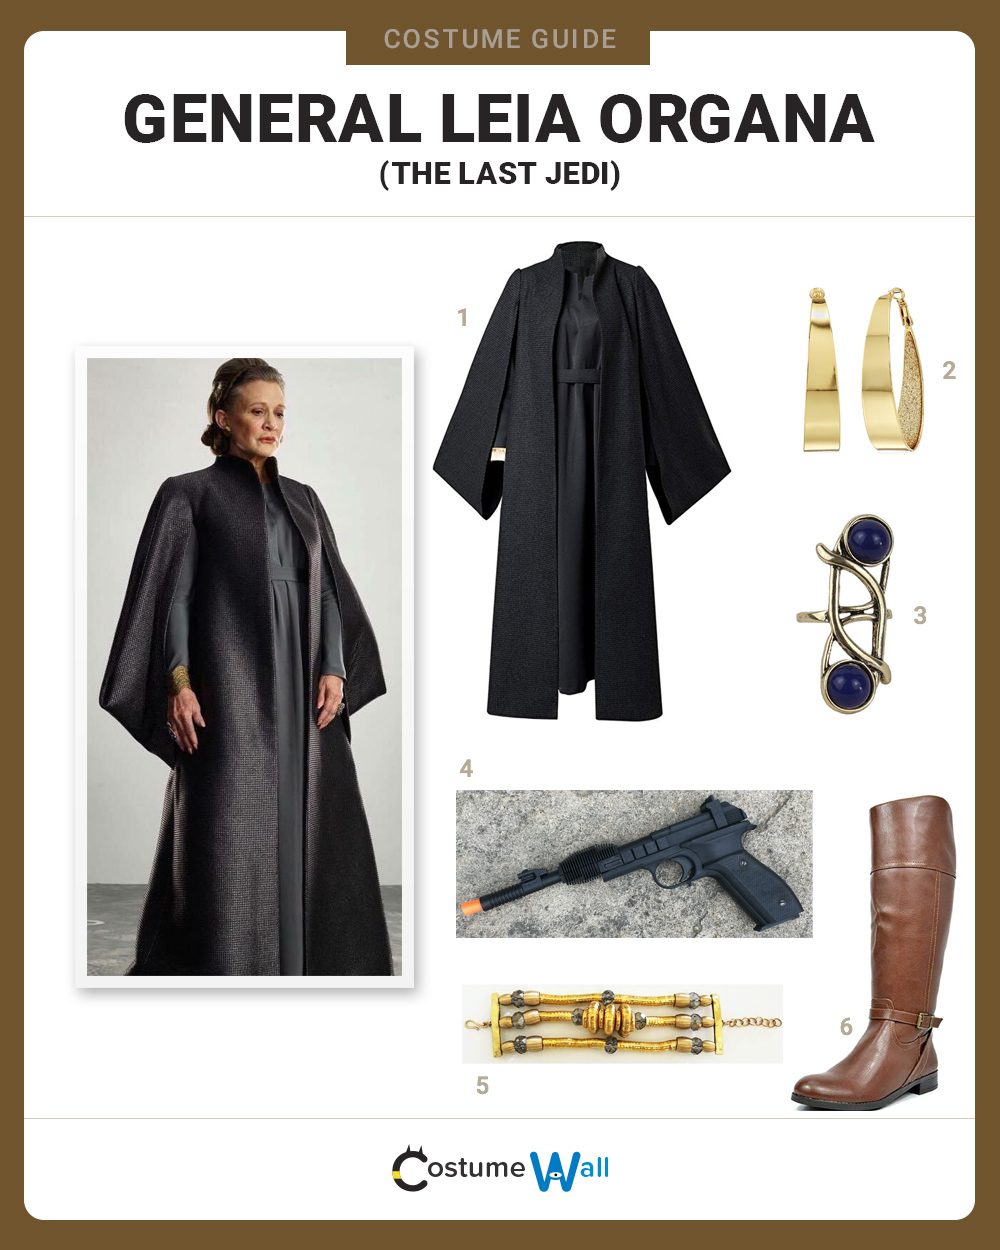 Dress Like General Leia Organa From The Last Jedi Costume Halloween And Cosplay Guides